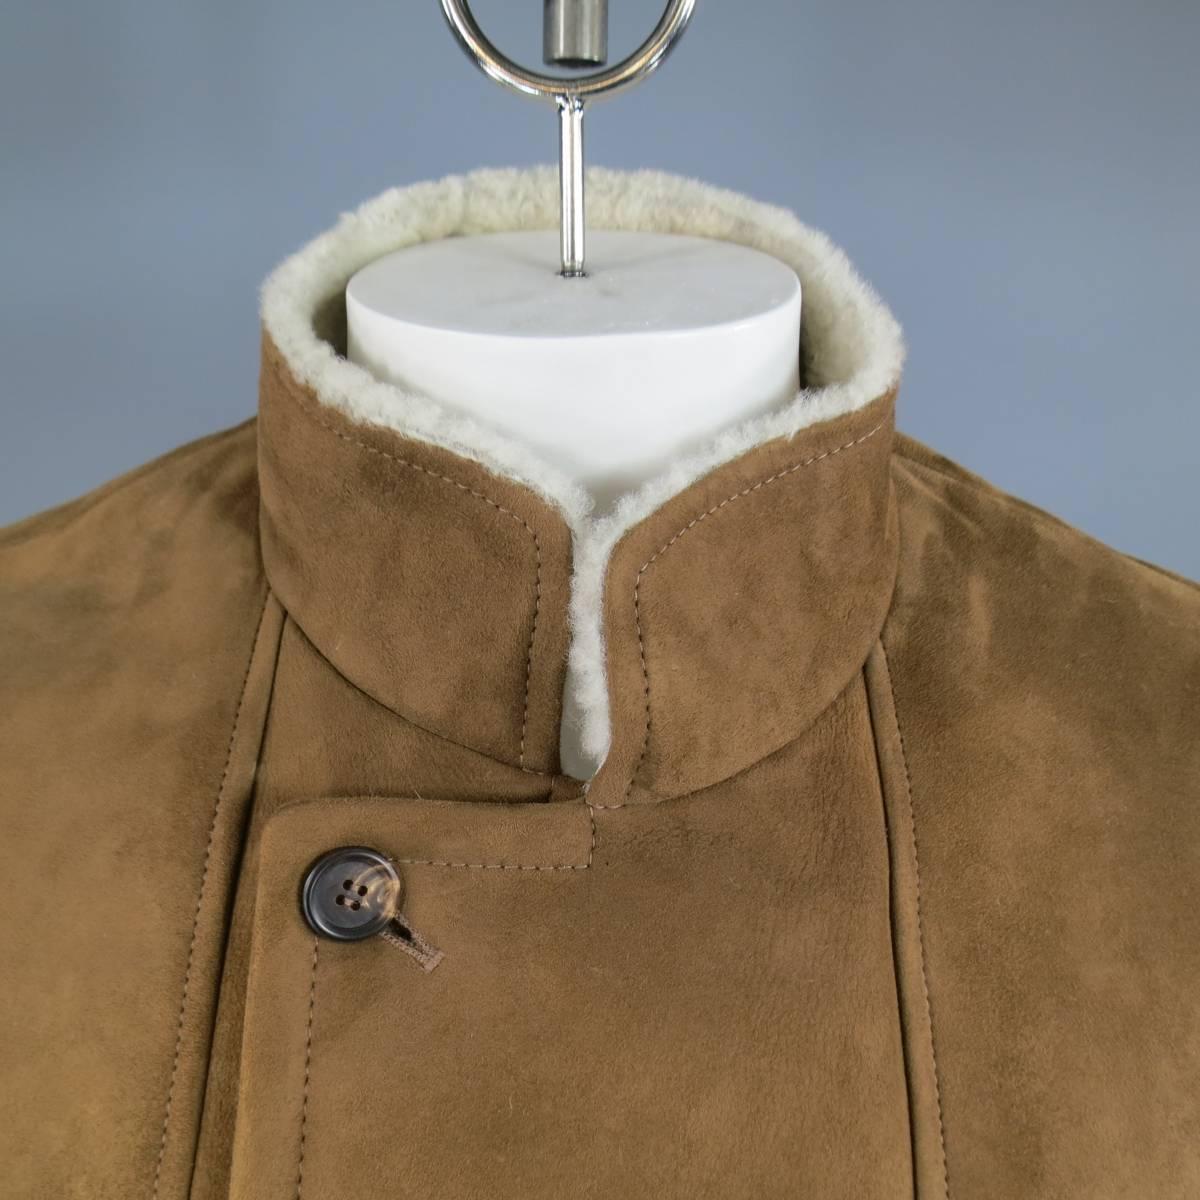 This classic BRUNELLO CUCINELLI winter coat comes in a soft tan shearling lined suede and features a double breasted button up closure, high collar, vertical and flap pockets. Minor wear throughout. Made in Italy.

Retails at $6995.00.

Good